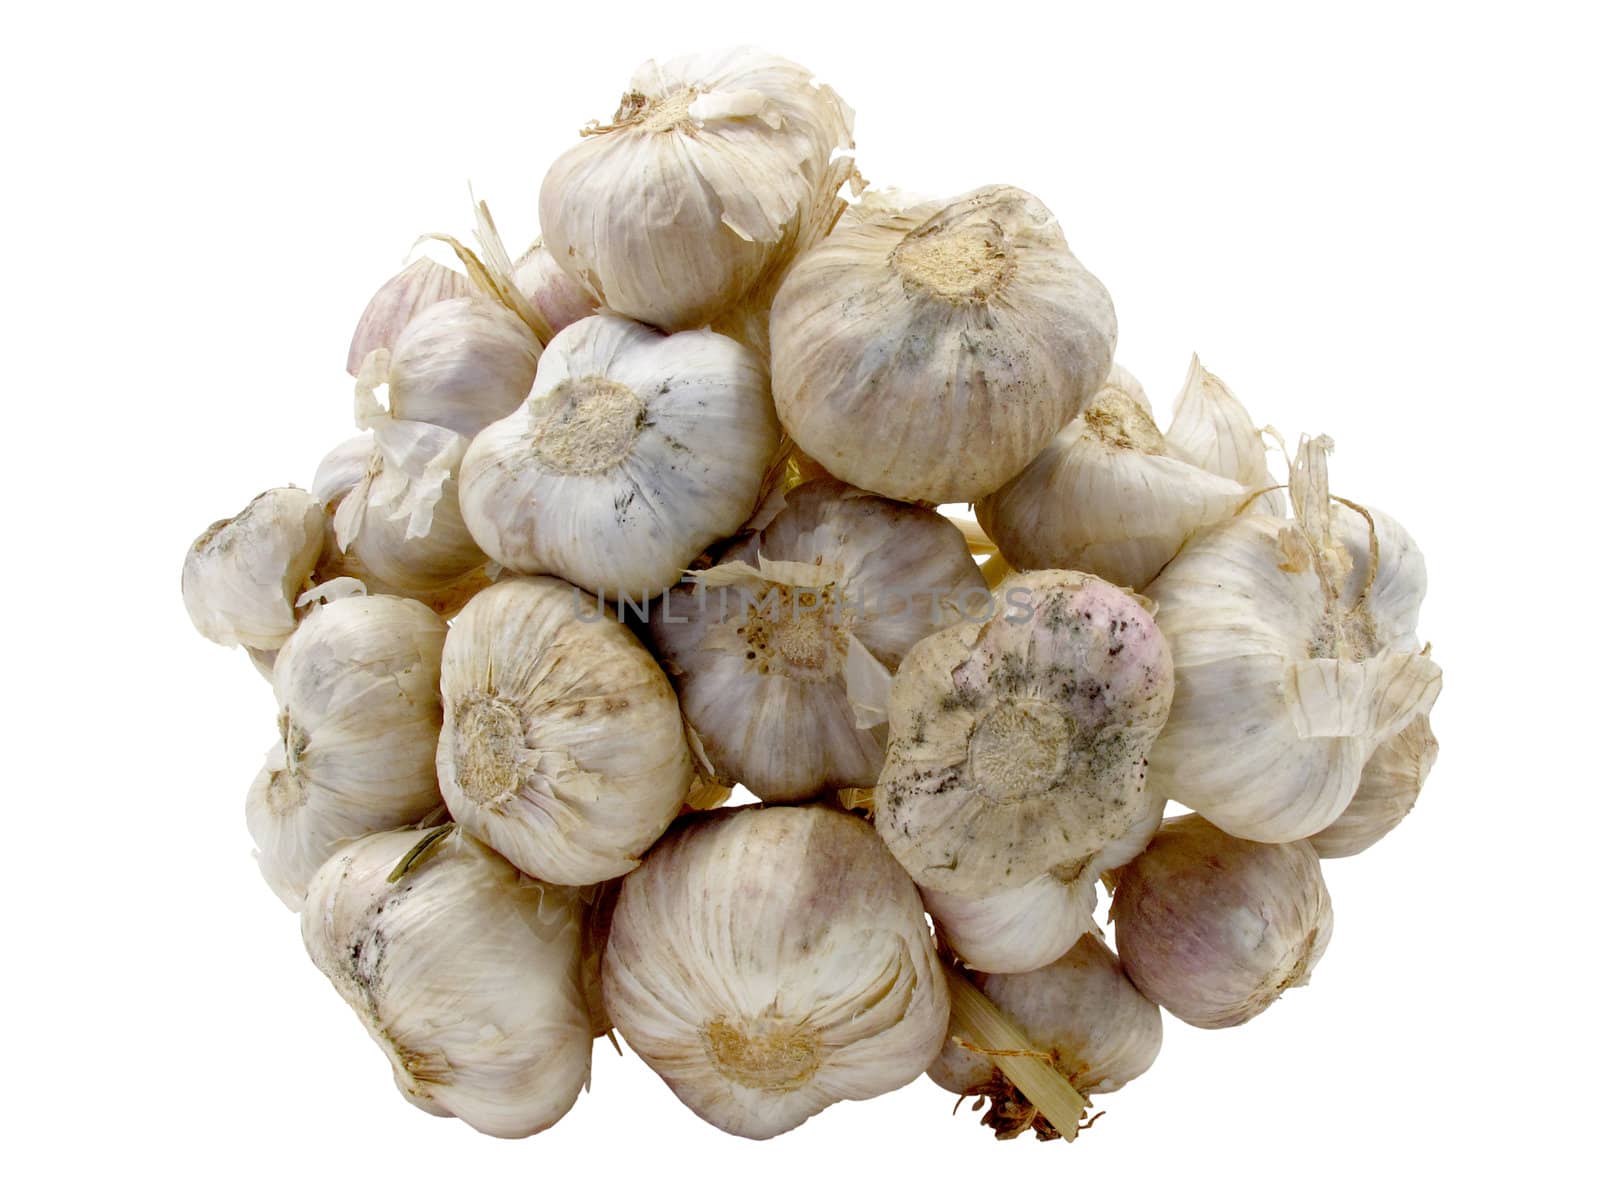 Under bunch of garlic on white background with clipping path